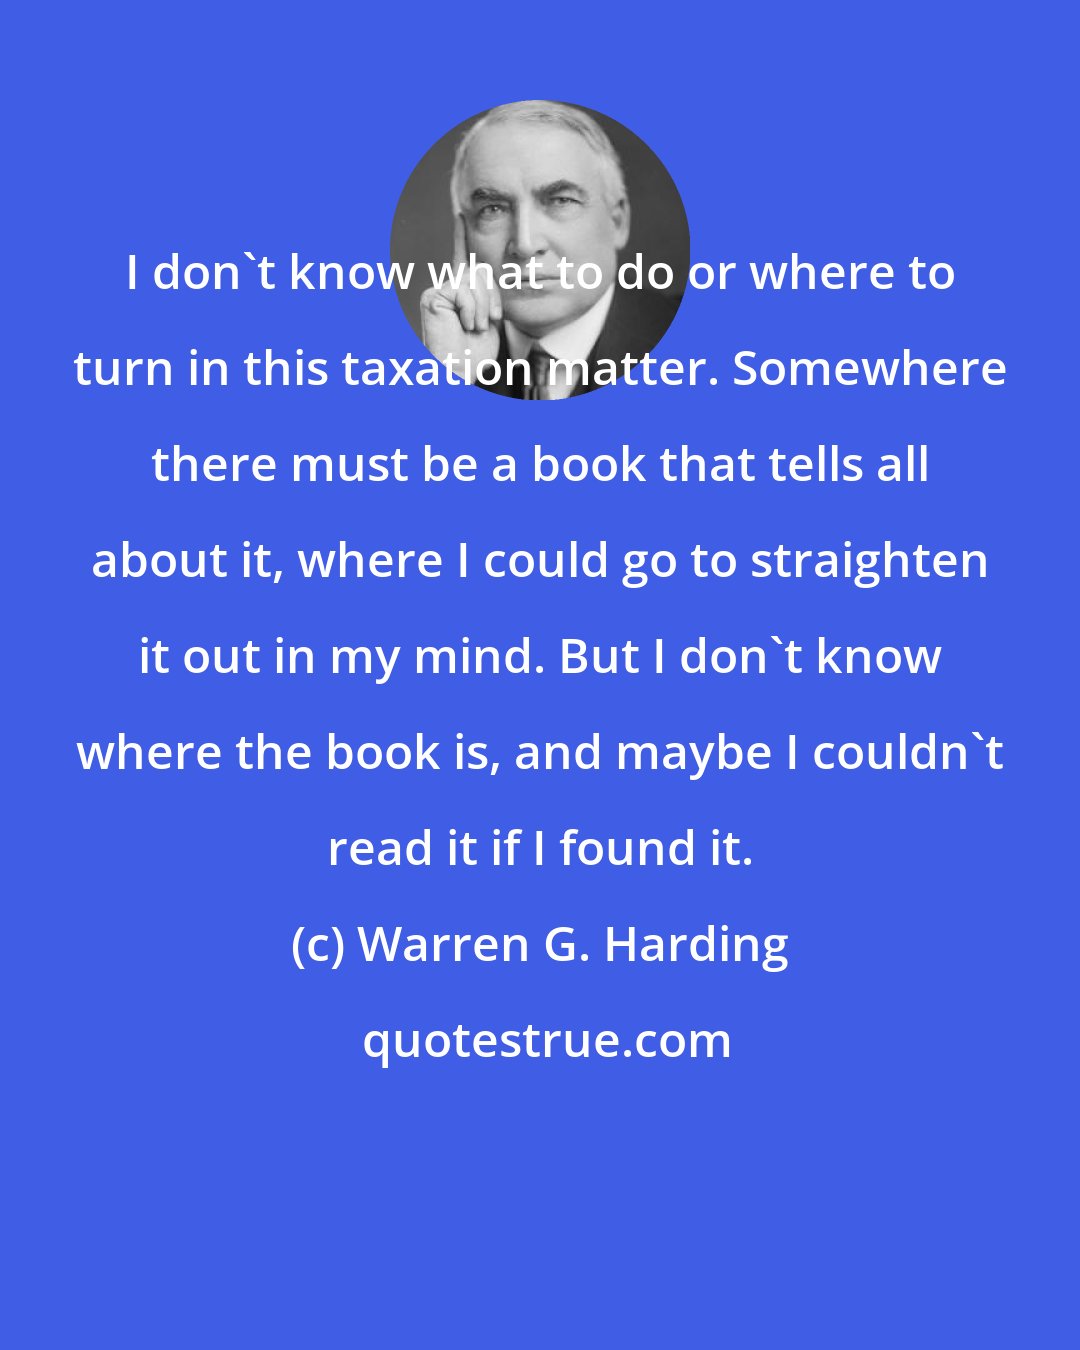 Warren G. Harding: I don't know what to do or where to turn in this taxation matter. Somewhere there must be a book that tells all about it, where I could go to straighten it out in my mind. But I don't know where the book is, and maybe I couldn't read it if I found it.